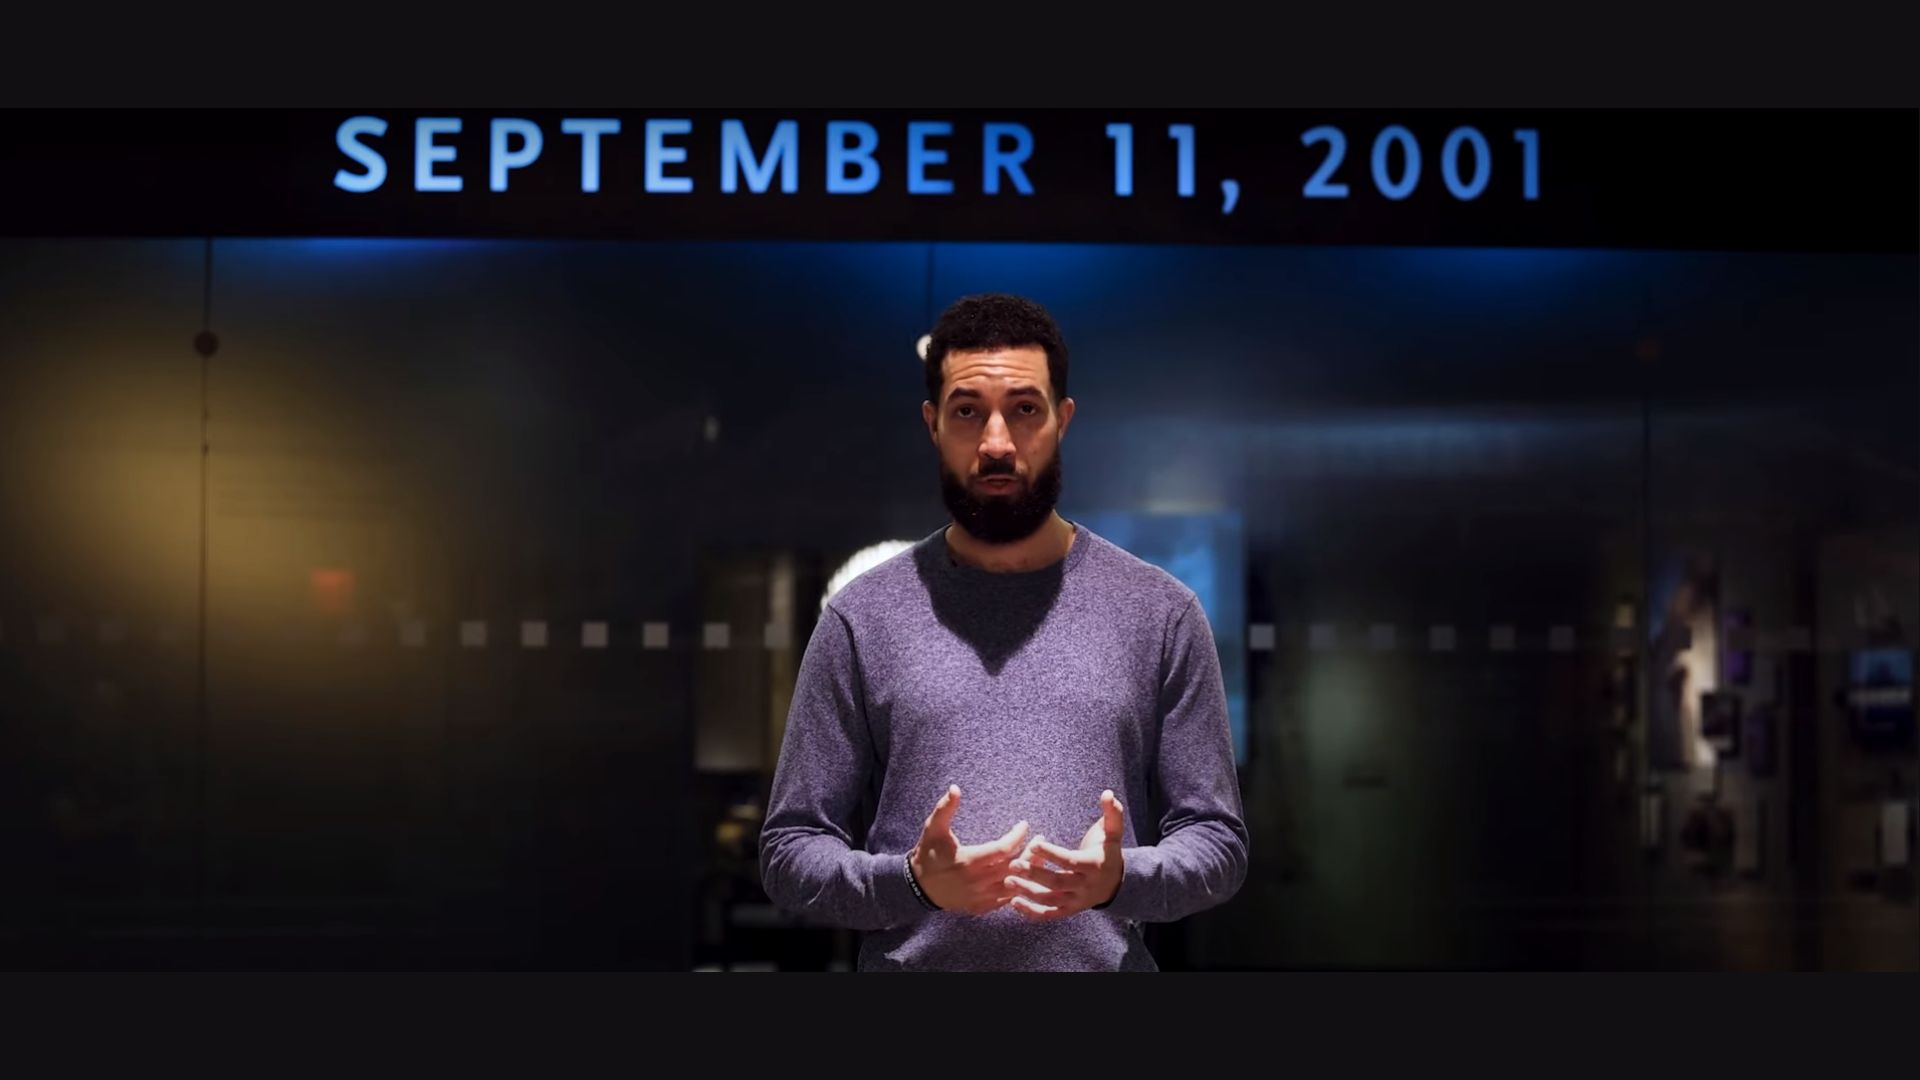 A man with dark hair and a beard, wearing a medium blue sweater, speaks in front of a darkened background. At the top, the date September 11, 2001 is visible in text.